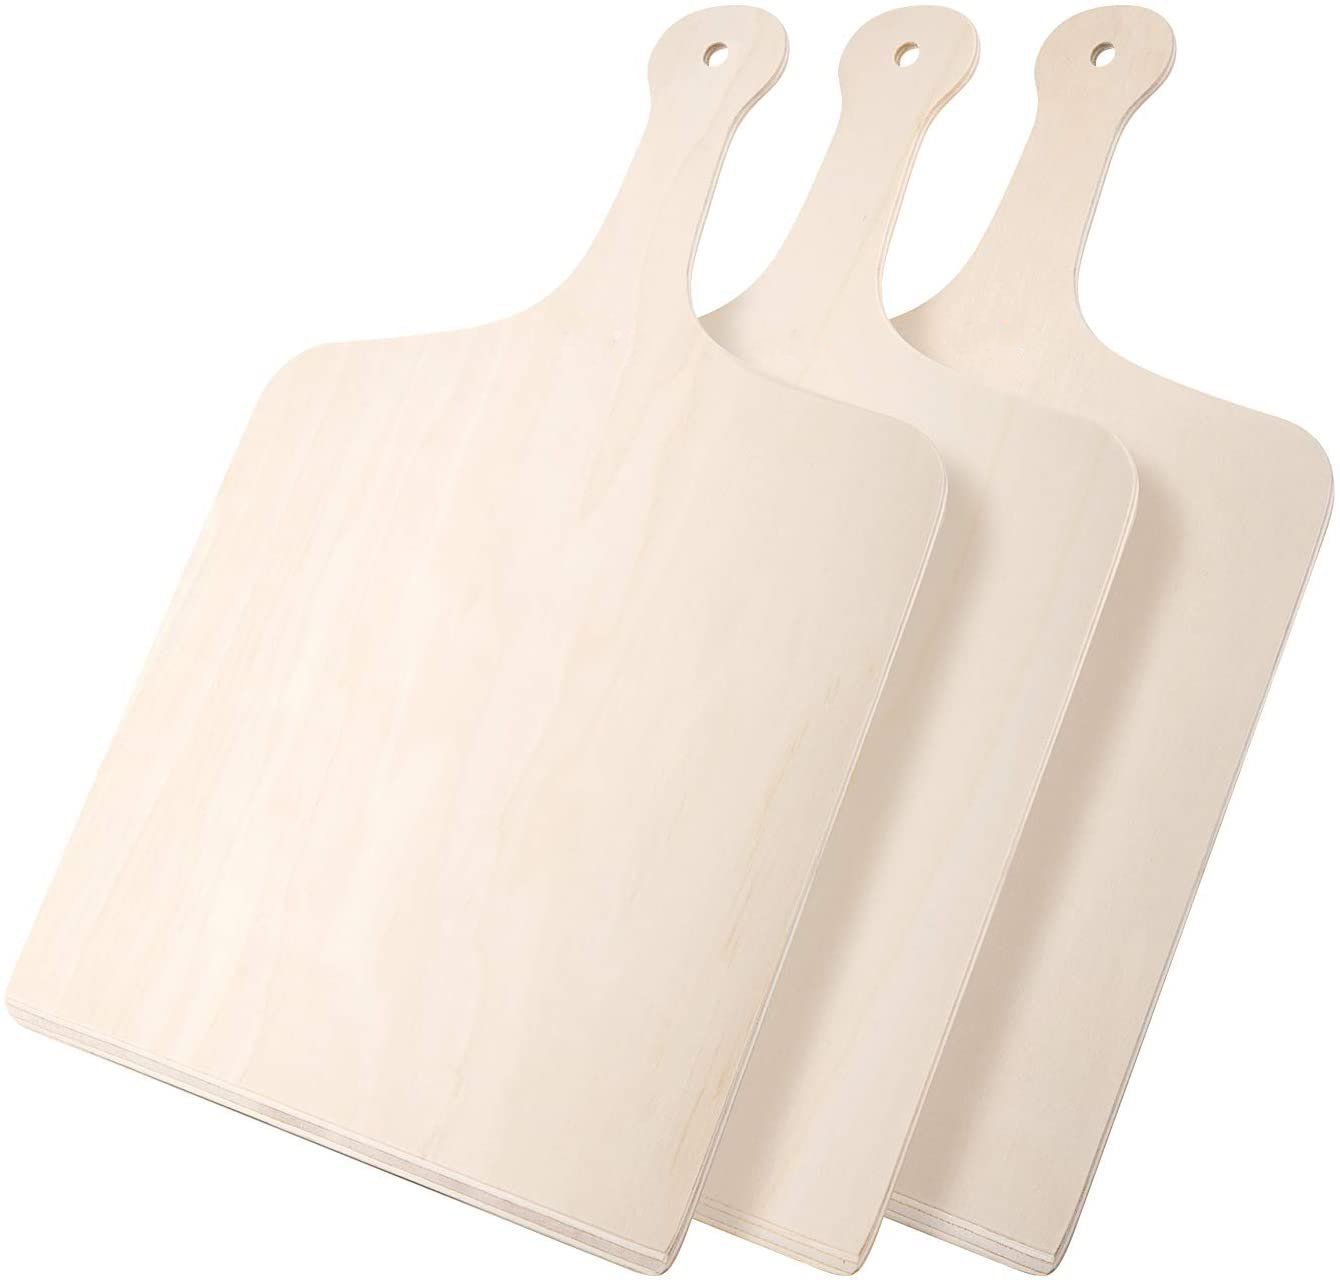 Whittlewud Pack of 3, Pizza Peel Wood, Wooden Cutting Board, Pizza Stone for oven, Pizza Spatula, Bread, Cutting Fruit, Vegetables.-6 Inch x 6 Inch / 6 MM